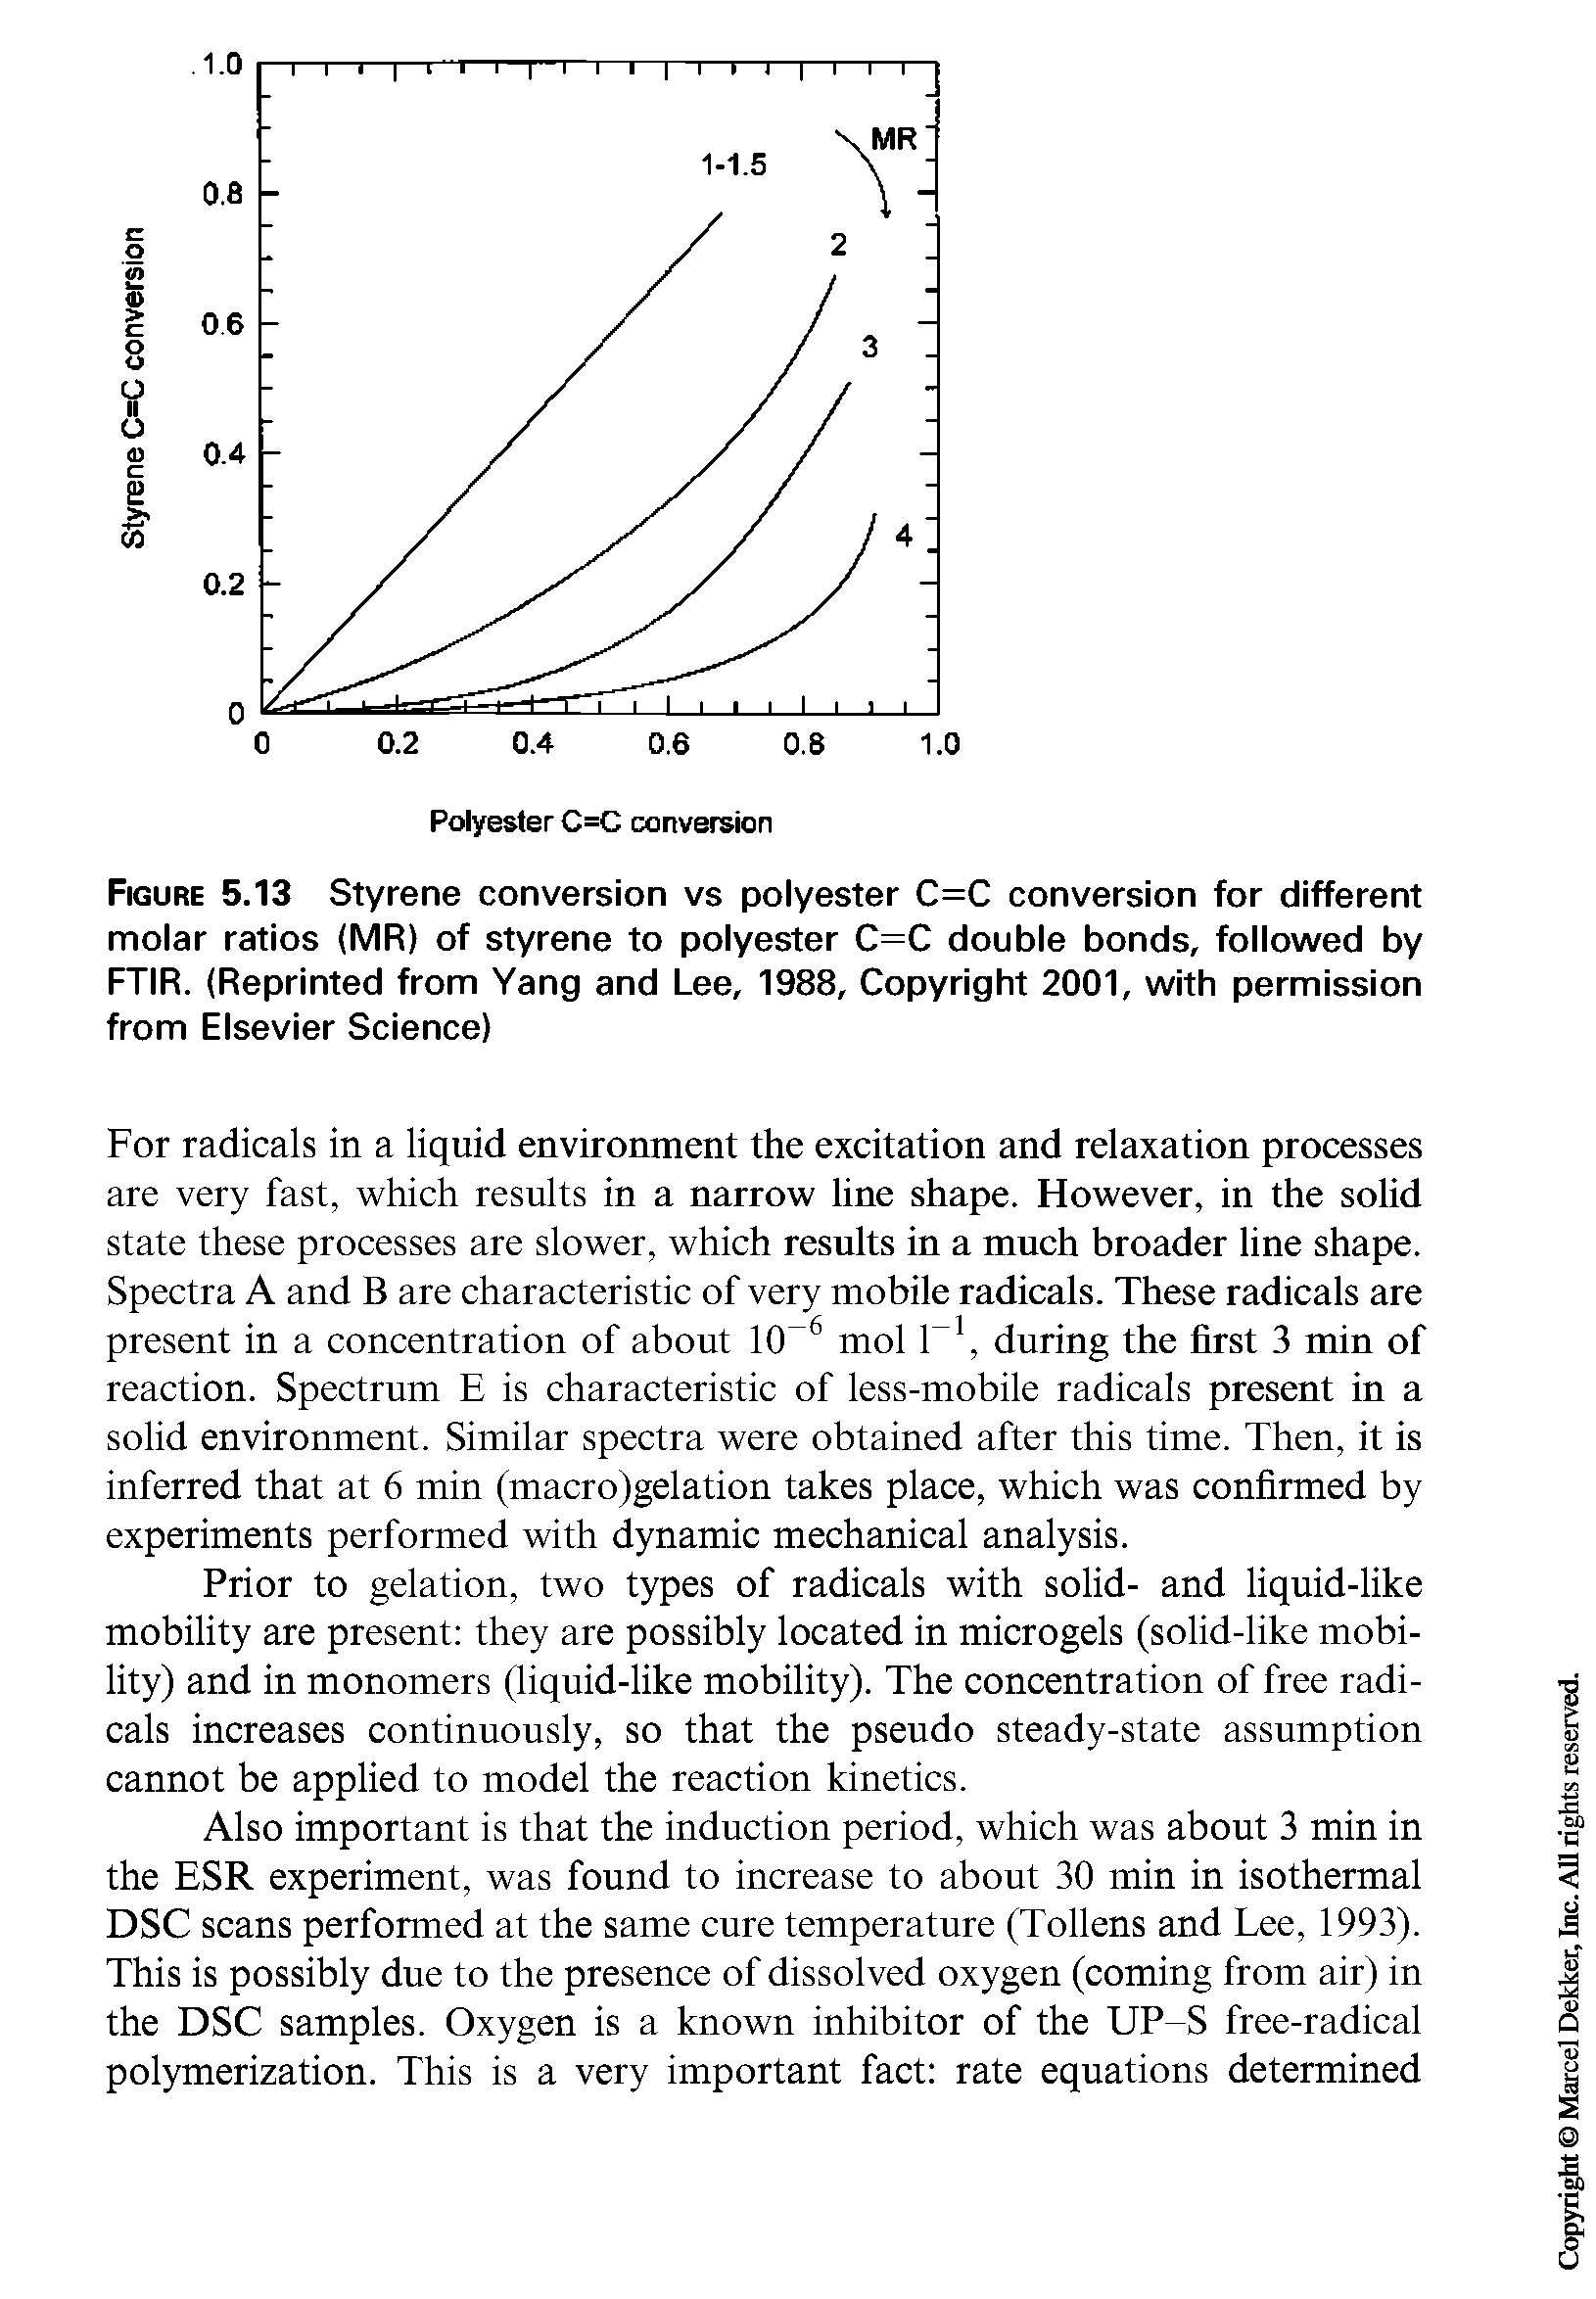 Figure 5.13 Styrene conversion vs polyester C=C conversion for different molar ratios (MR) of styrene to polyester C=C double bonds, followed by FTIR. (Reprinted from Yang and Lee, 1988, Copyright 2001, with permission from Elsevier Science)...